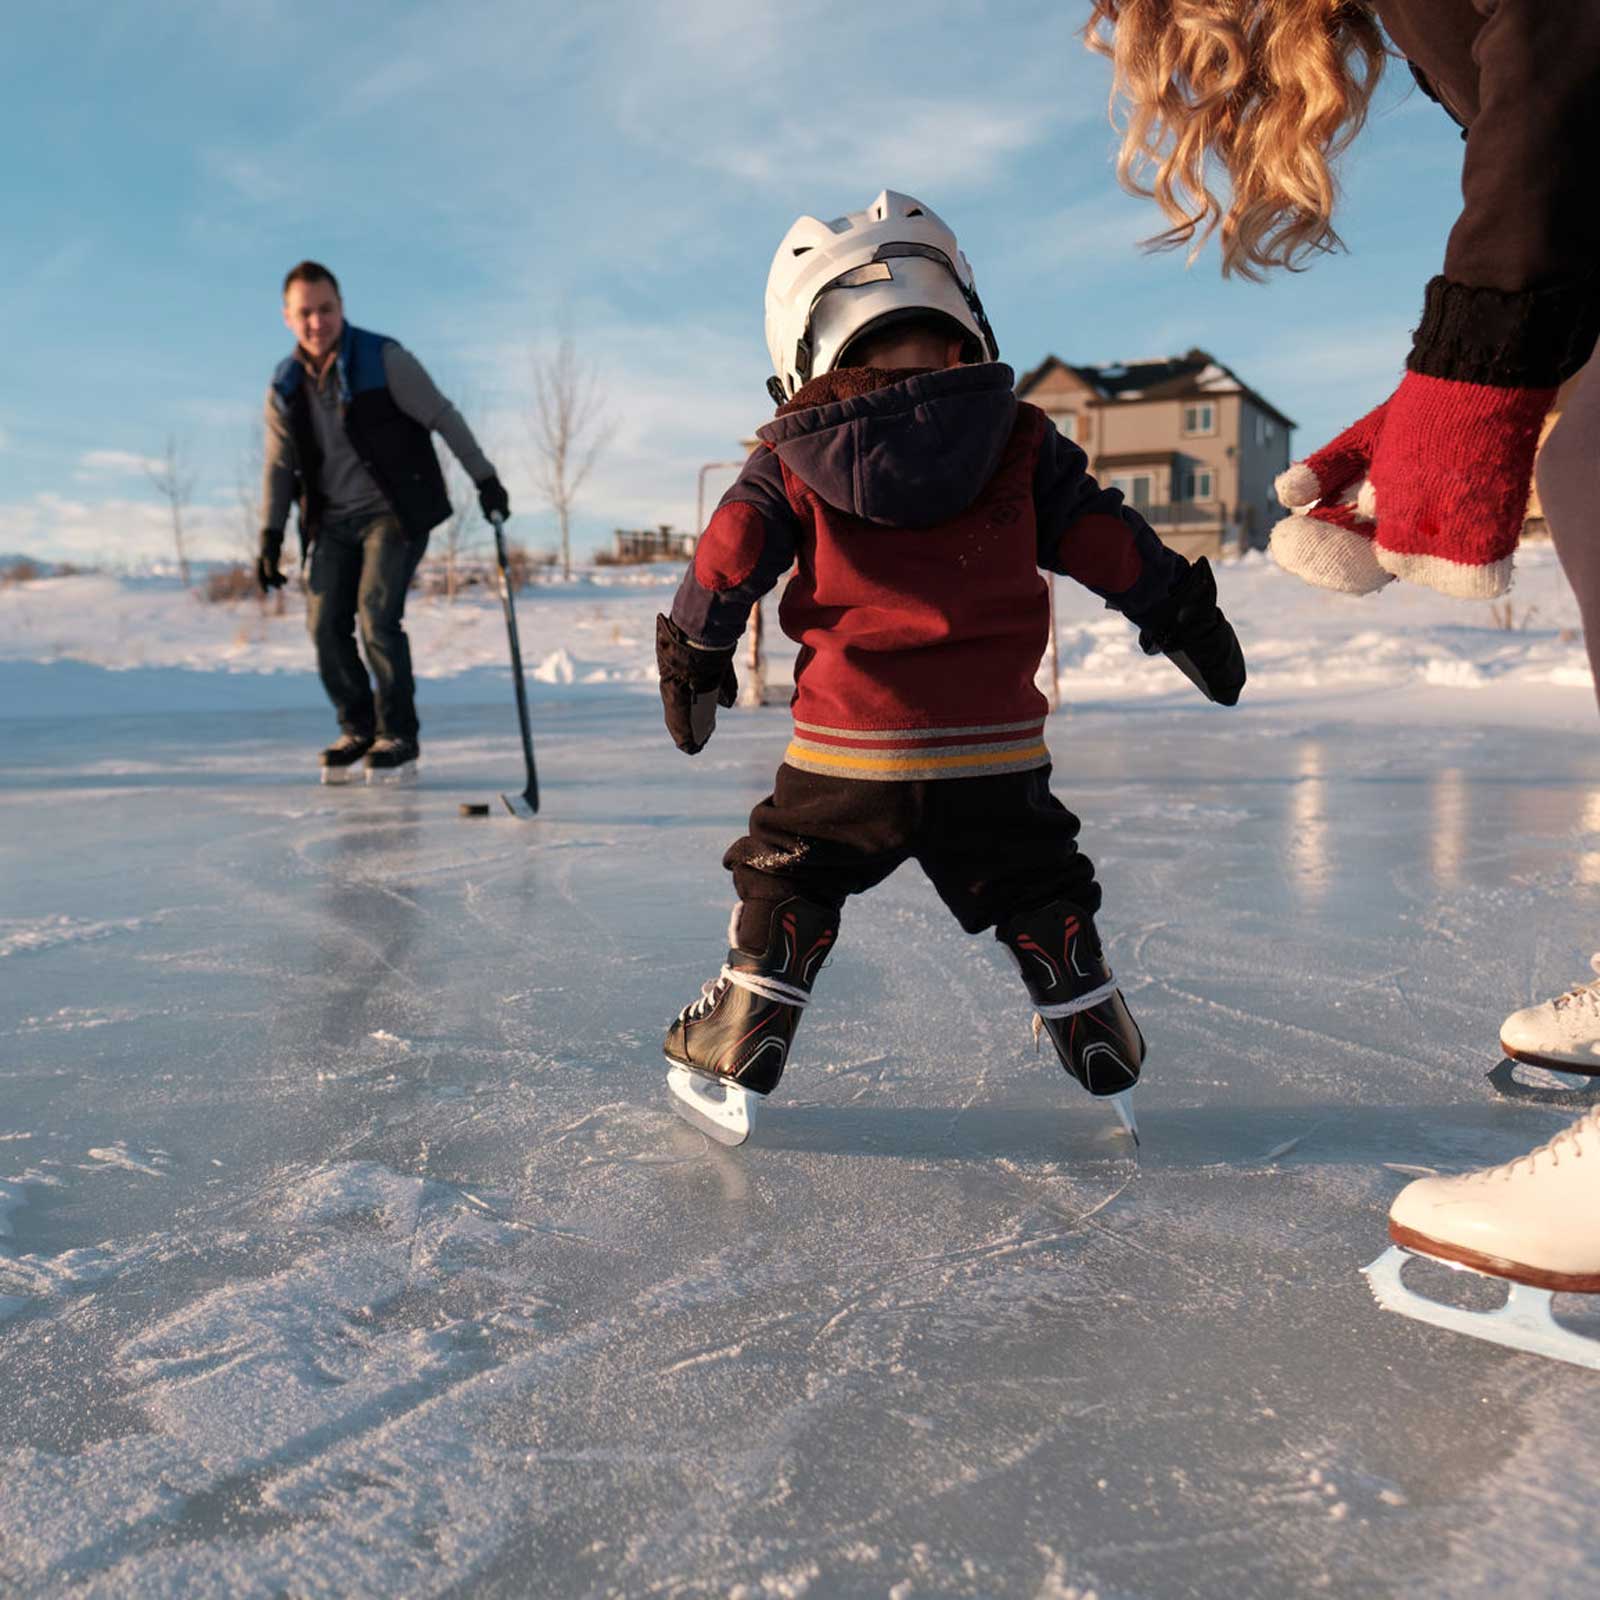 Have Fun (and Stay Sane) with Your Kids This Winter